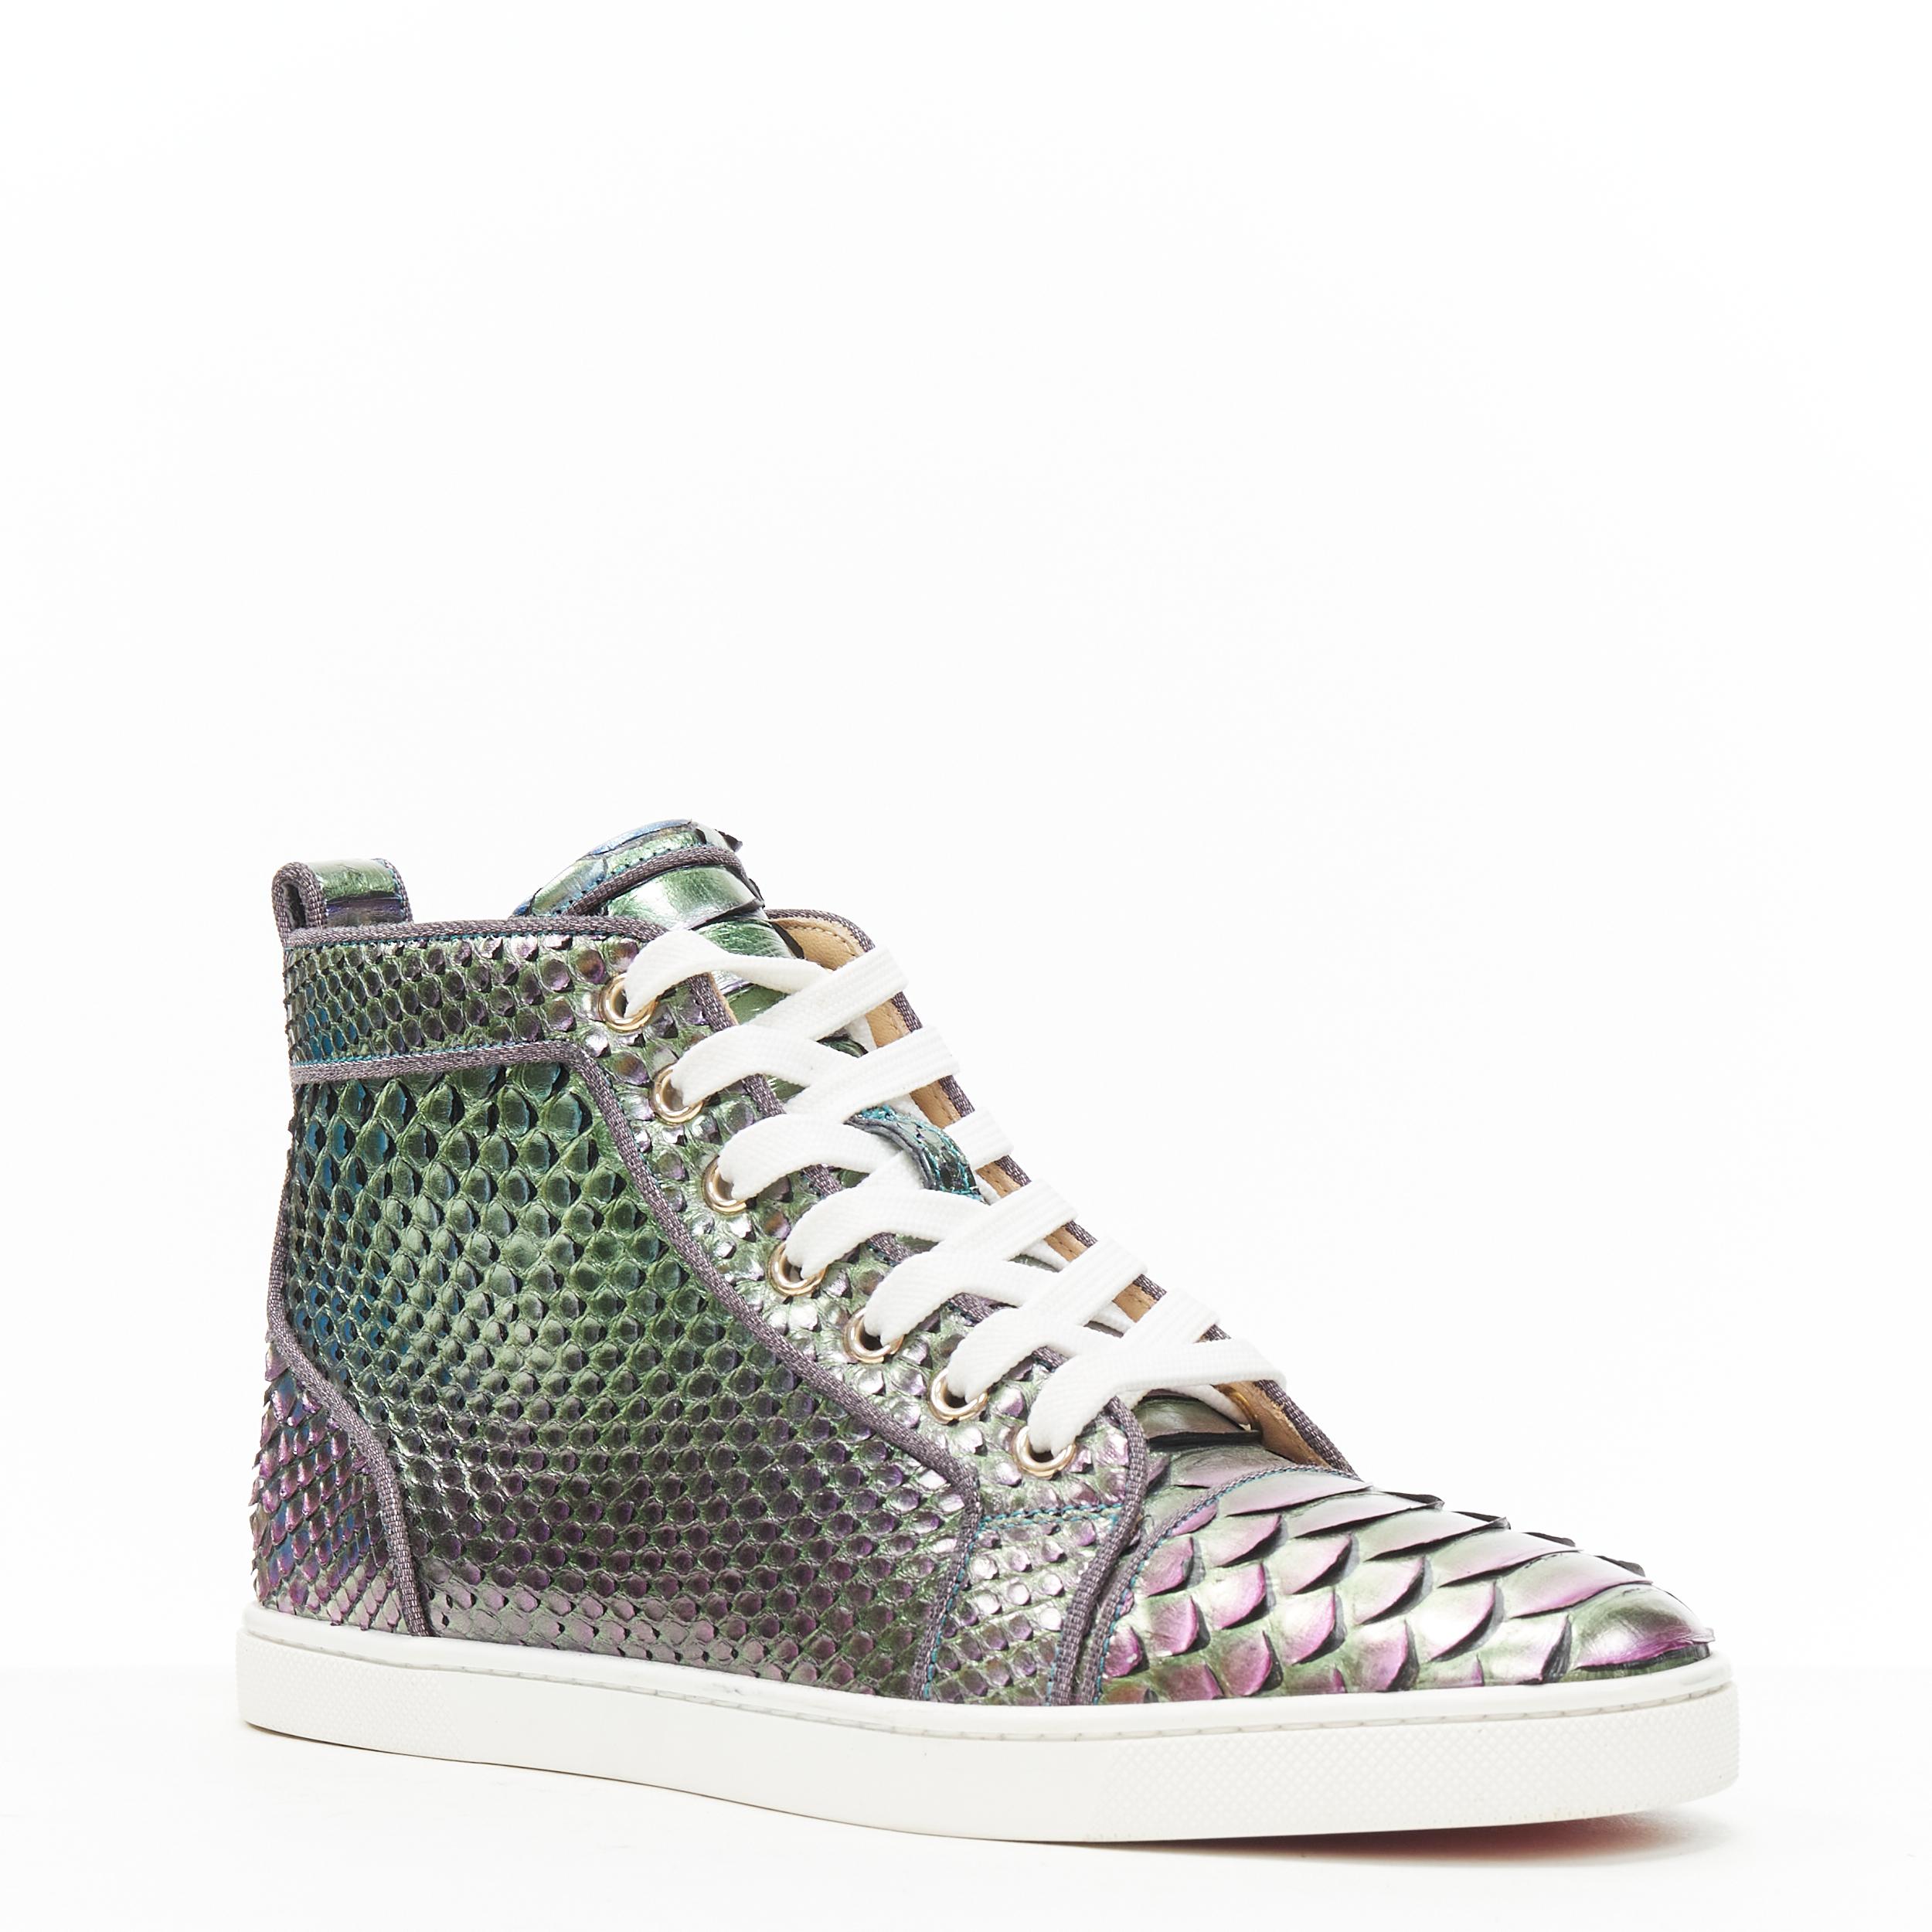 CHRISTIAN LOUBOUTIN Louis Orlato green purple iridescent scaled sneaker EU38 Reference: TGAS/B01133 
Brand: Christian Louboutin 
Designer: Christian Louboutin 
Model: Louis Orlato Python 
Material: Leather 
Color: Green 
Pattern: Solid 
Closure: